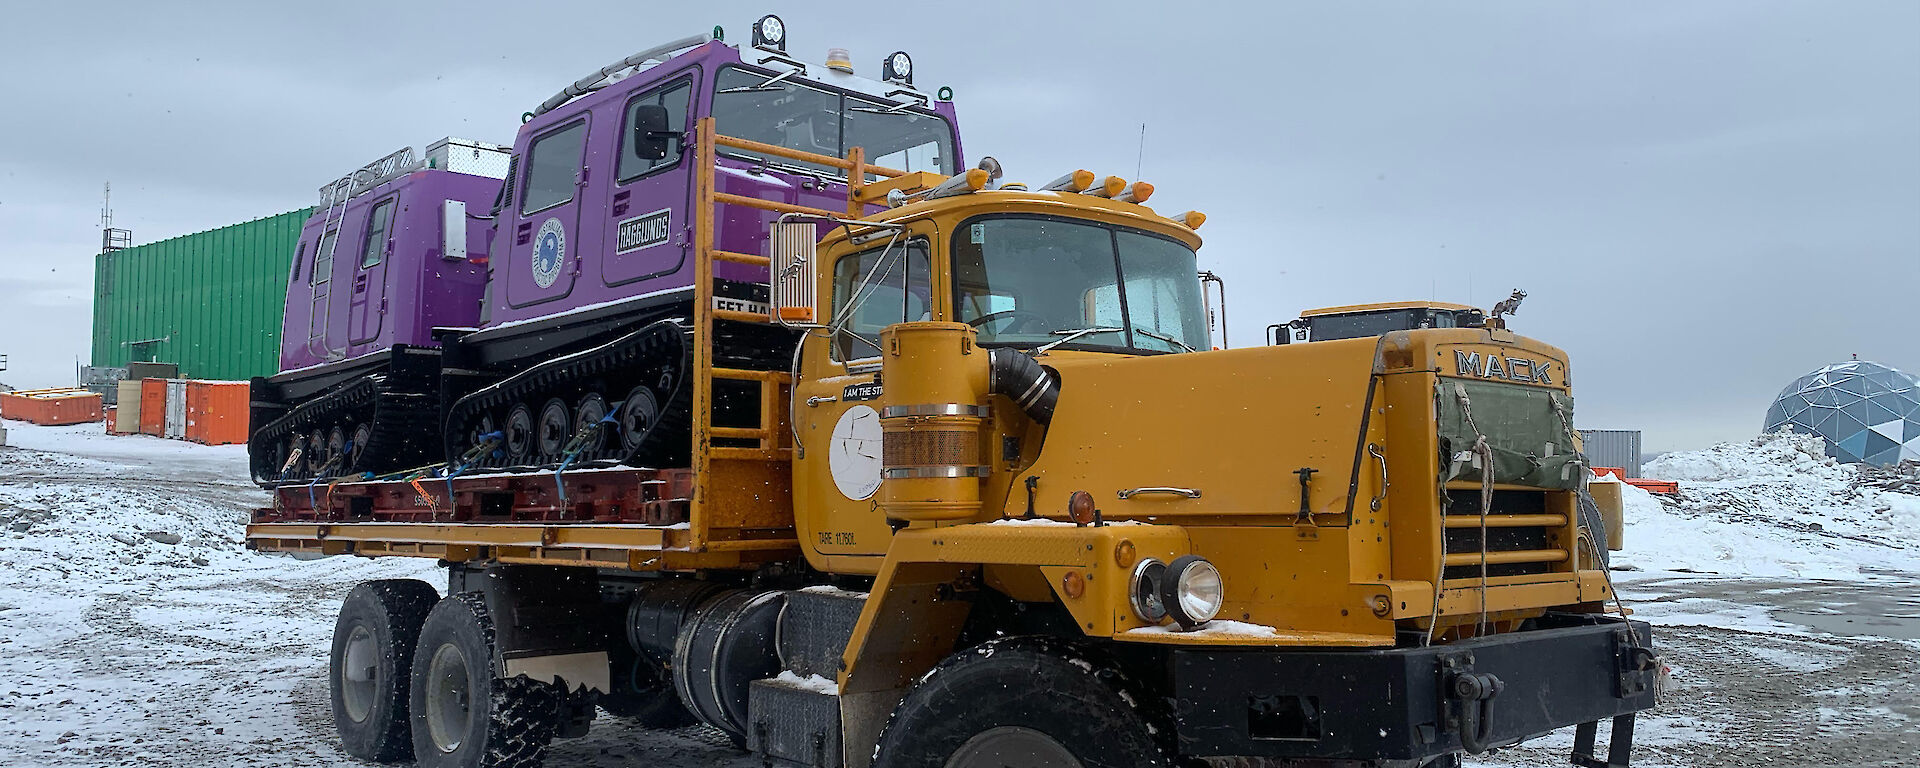 Purple Hägglunds vehicle on the back of a Mack truck.